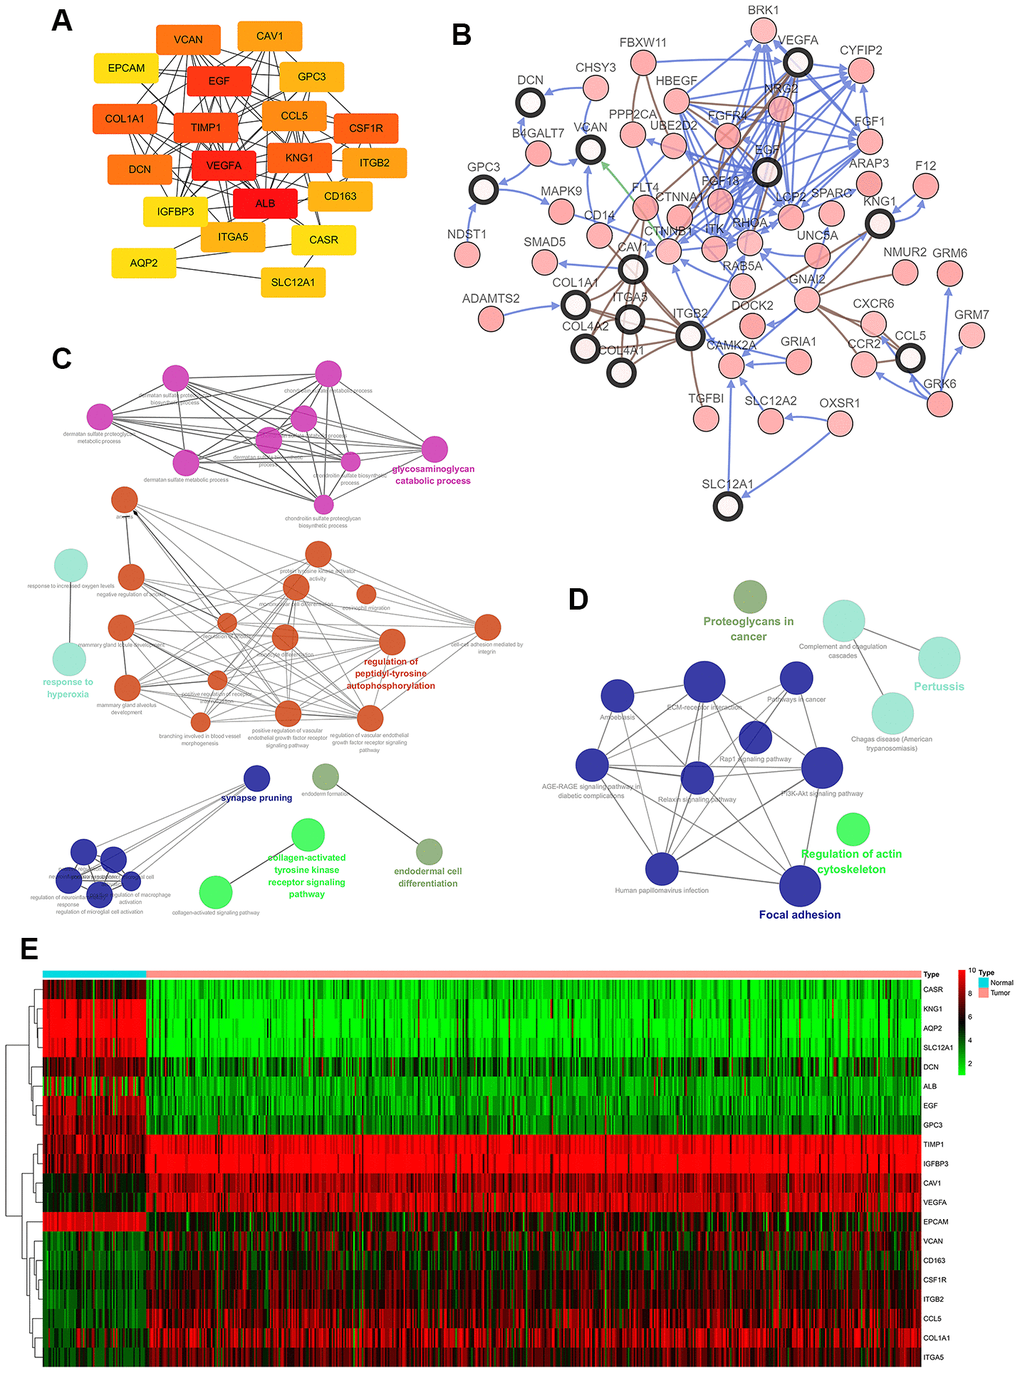 Interaction network and analysis of hub genes. (A) The 20 most important hub genes were screened using the Cytoscape software plugin cytoHubba. (B) Hub genes and their co-expressed genes were analyzed using the cBioPortal. Nodes with a bold black outline represent hub genes. Nodes with thin black outlines represent co-expressed genes. (C) Biological processes functional annotation analysis of hub genes was performed using ClueGO and CluePedia. Different colors of nodes refer to the functional annotation of ontologies. Corrected P value D) KEGG functional annotation analysis of hub genes was performed by ClueGO and CluePedia. Different colors of nodes refer to the functional annotation of ontologies. Corrected P value E) Hierarchical clustering heatmap of the 20 most important hub genes was constructed from a TCGA cohort. Red indicates that the relative expression of genes was upregulated, green indicates downregulation, and black indicates that no significant change in gene expression was observed; gray indicates that signal strength was not high enough to be detected. Abbreviation: TCGA: the cancer genome atlas program; KEGG: Kyoto Encyclopedia of Genes and Genomes.